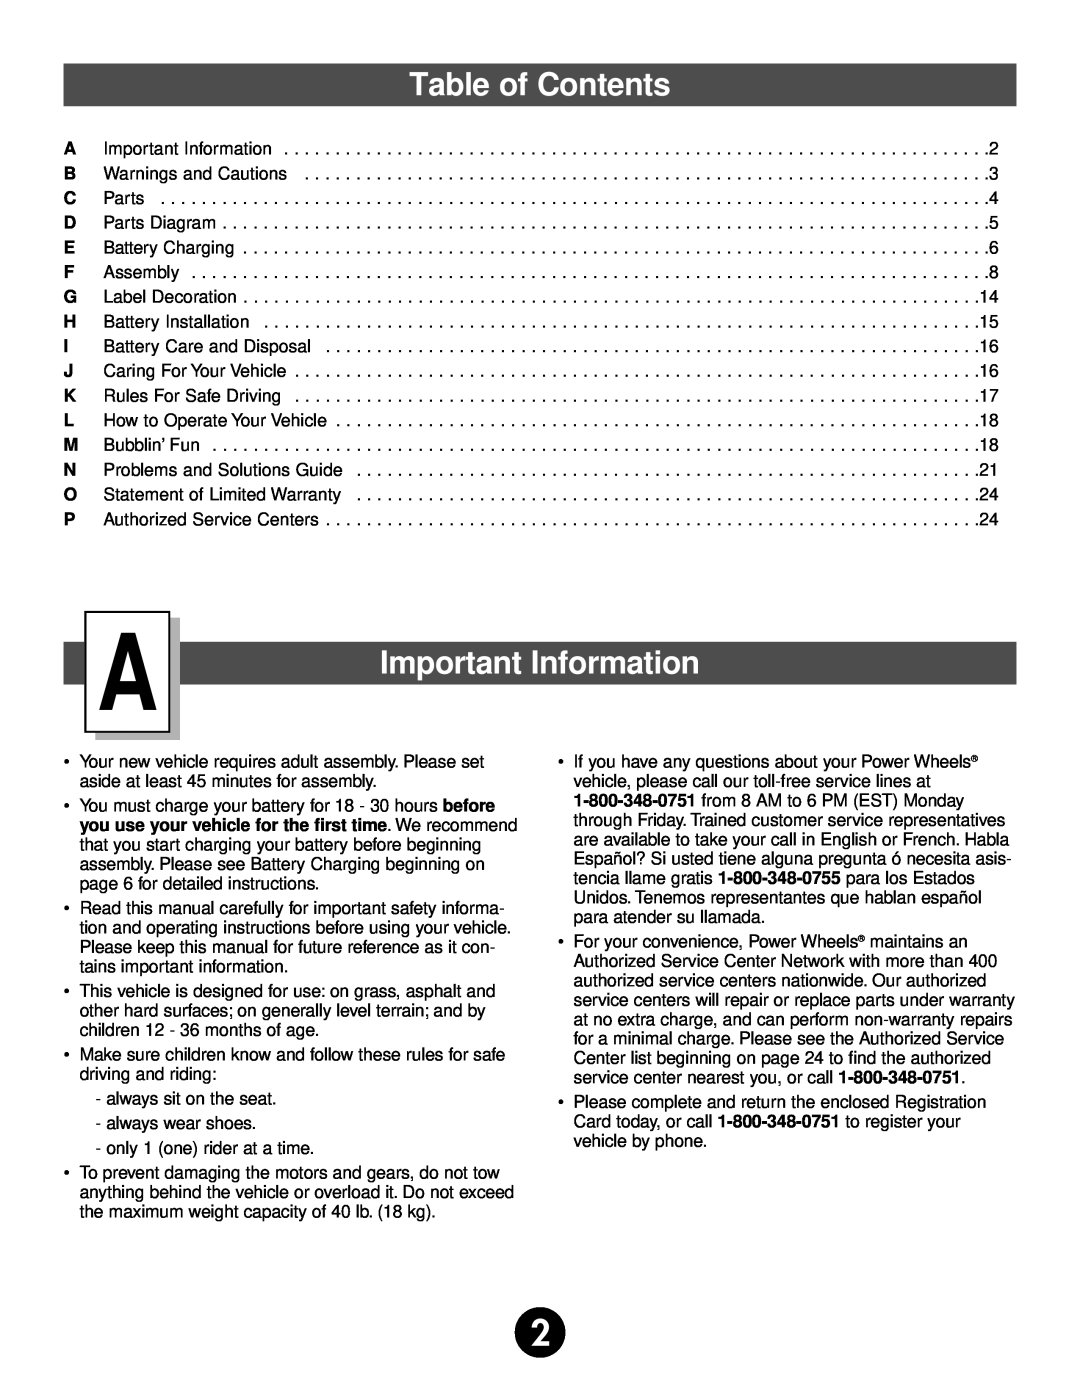 Fisher-Price 75320 owner manual Table of Contents, Important Information 